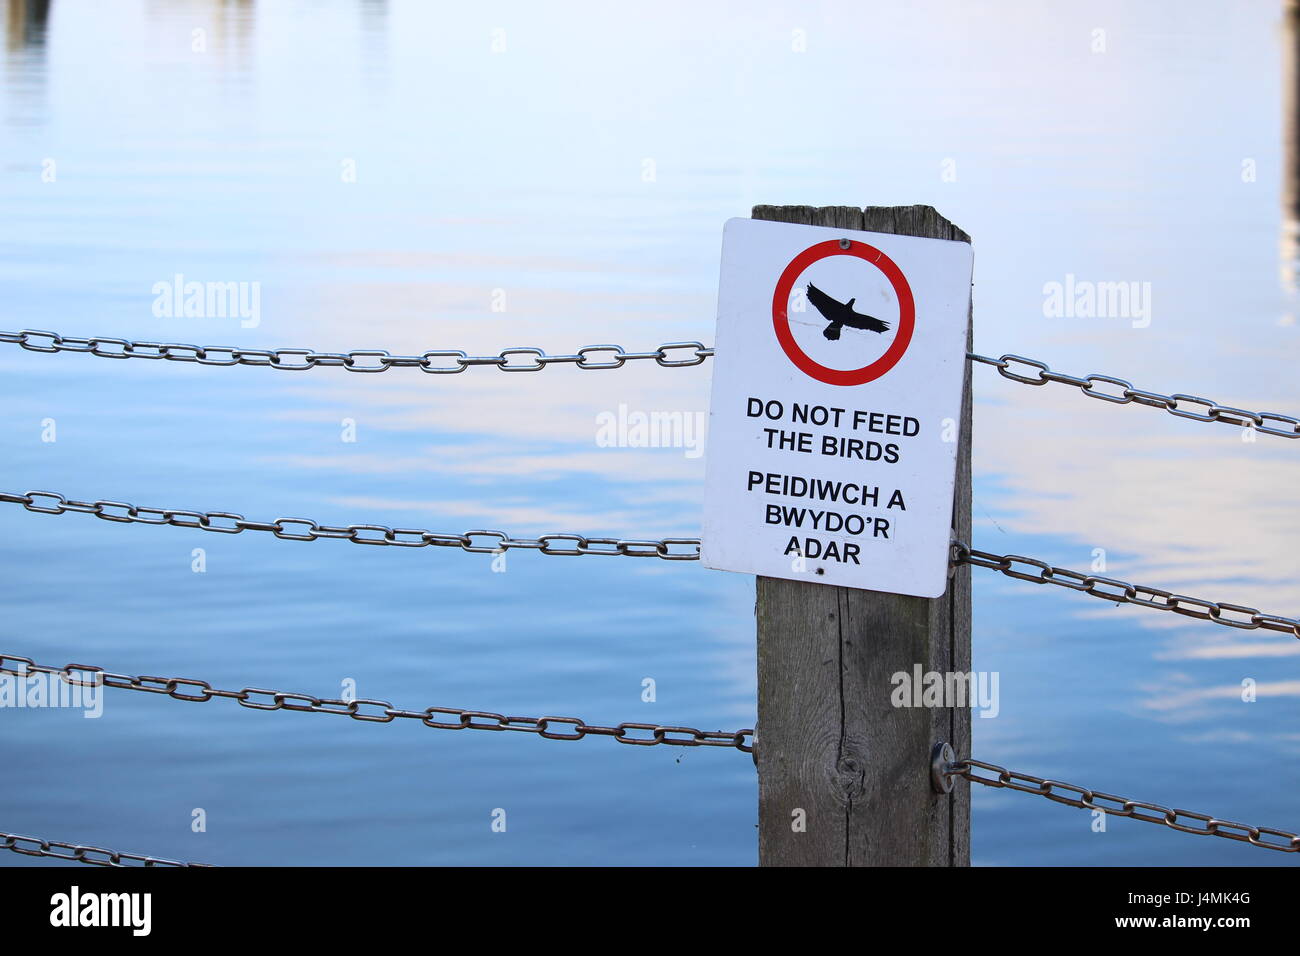 A Welsh and English 'don't feed the birds' sign, on a wooden post, with chain link fencing, and sunny reflections in water background Stock Photo